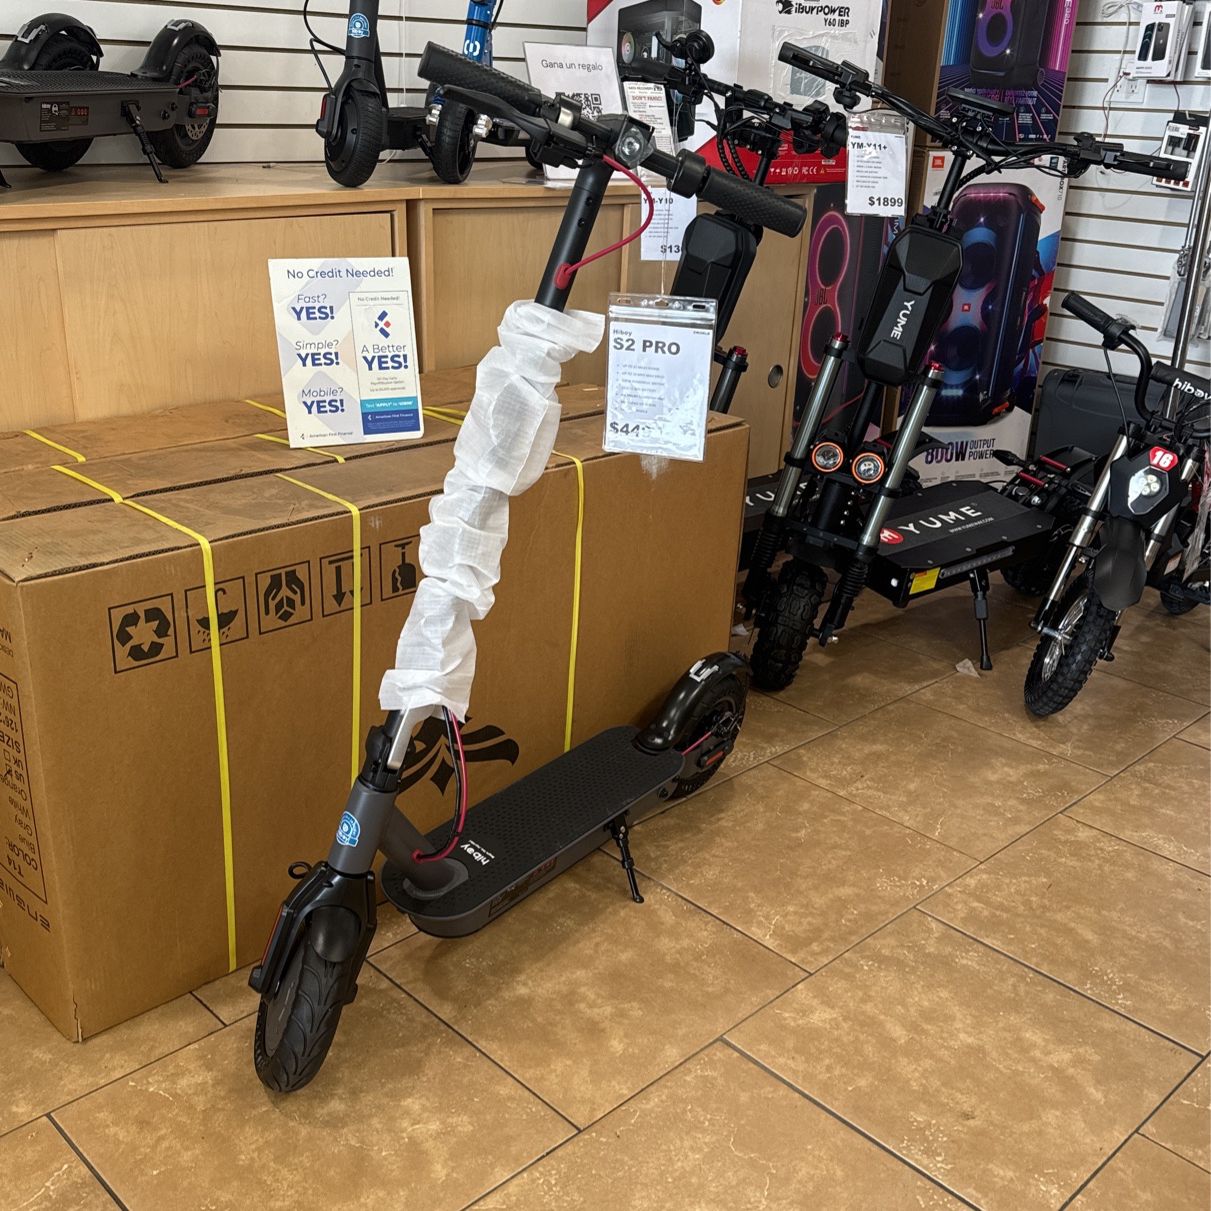 New Hiboy Electric Scooter S2 Pro ( Payments Available)